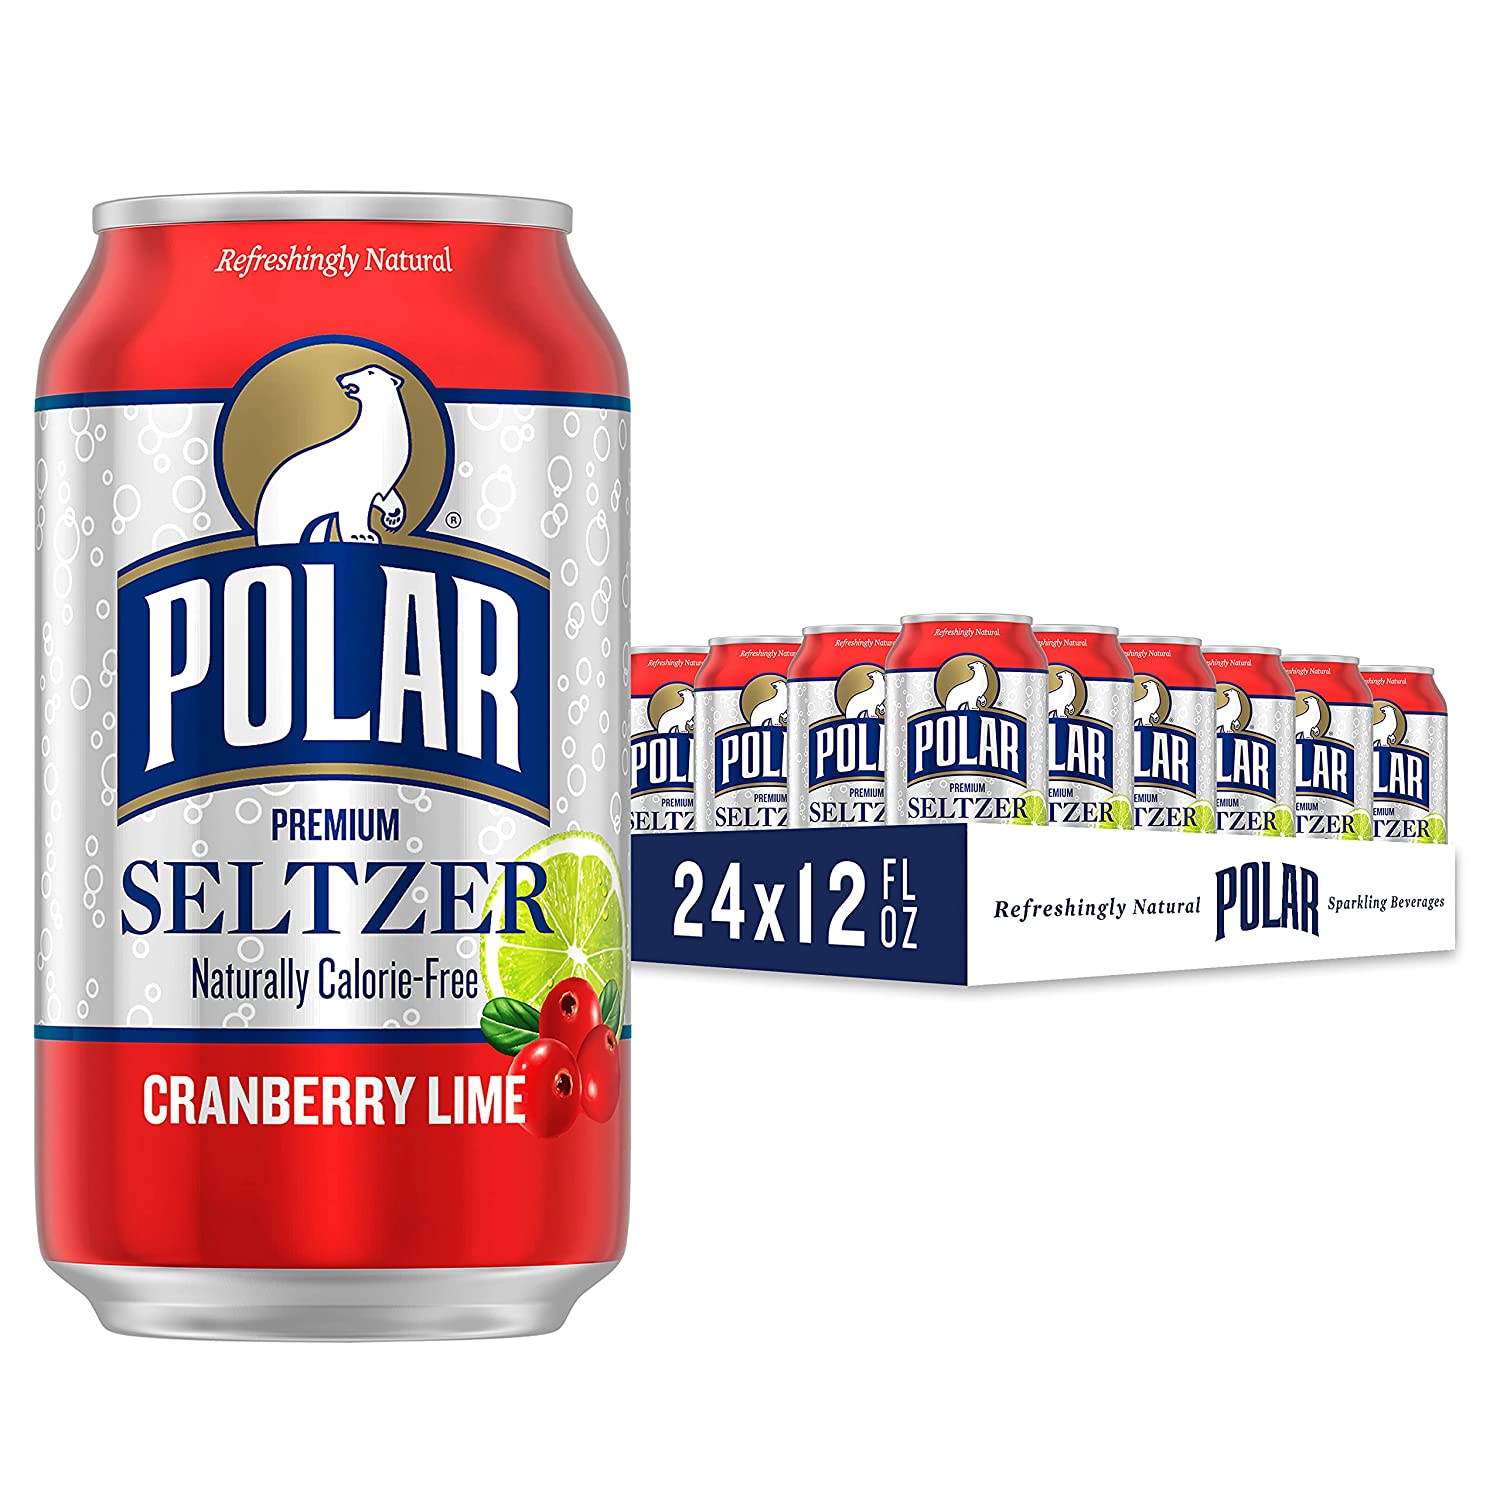 24-Pack 12-Oz Polar Seltzer Water (Cranberry Lime) $5.51 w/ S&S + Free Shipping w/ Prime or on orders over $25